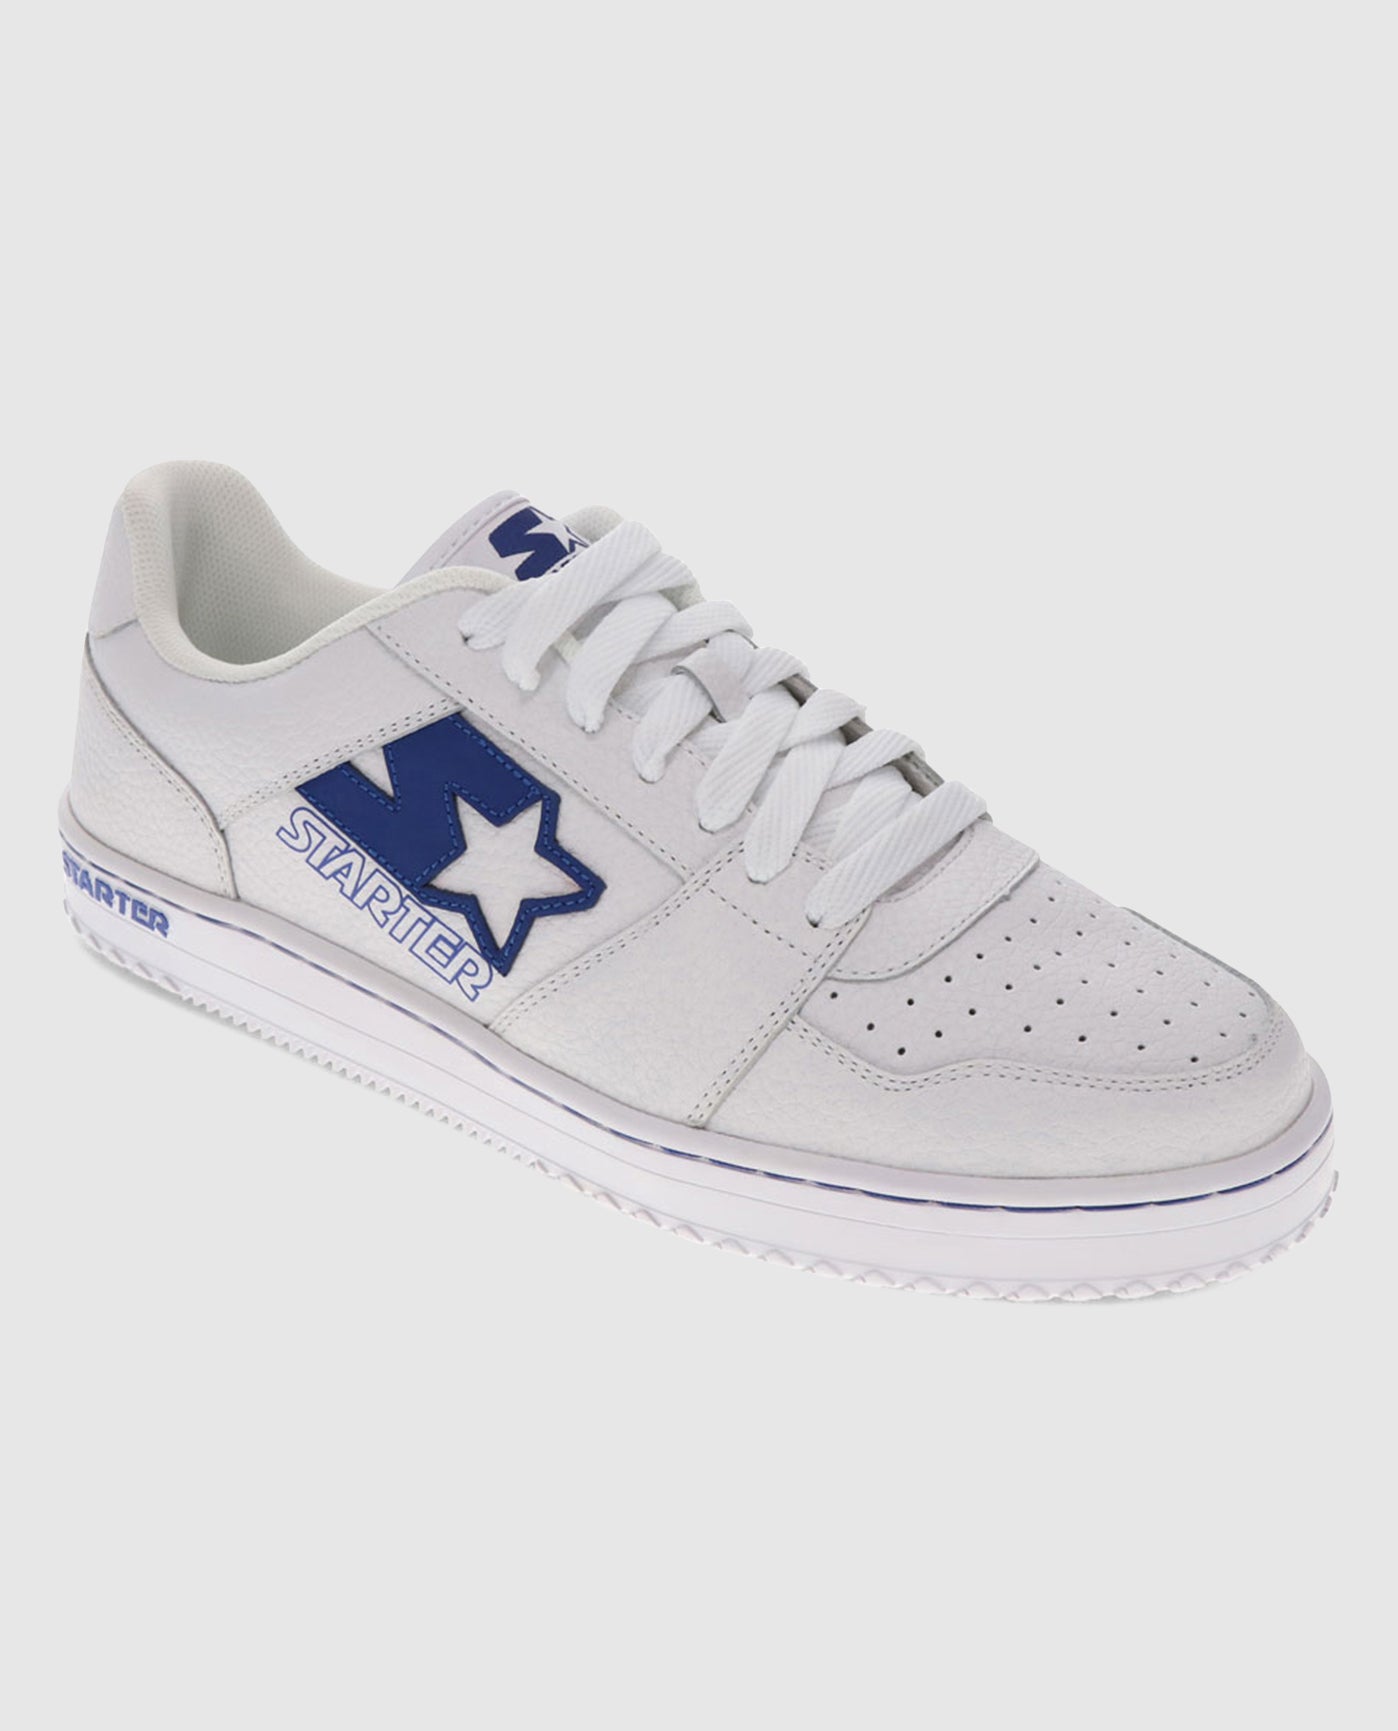 MLB San Diego Padres Max Sole Sneakers Shoes - T-shirts Low Price